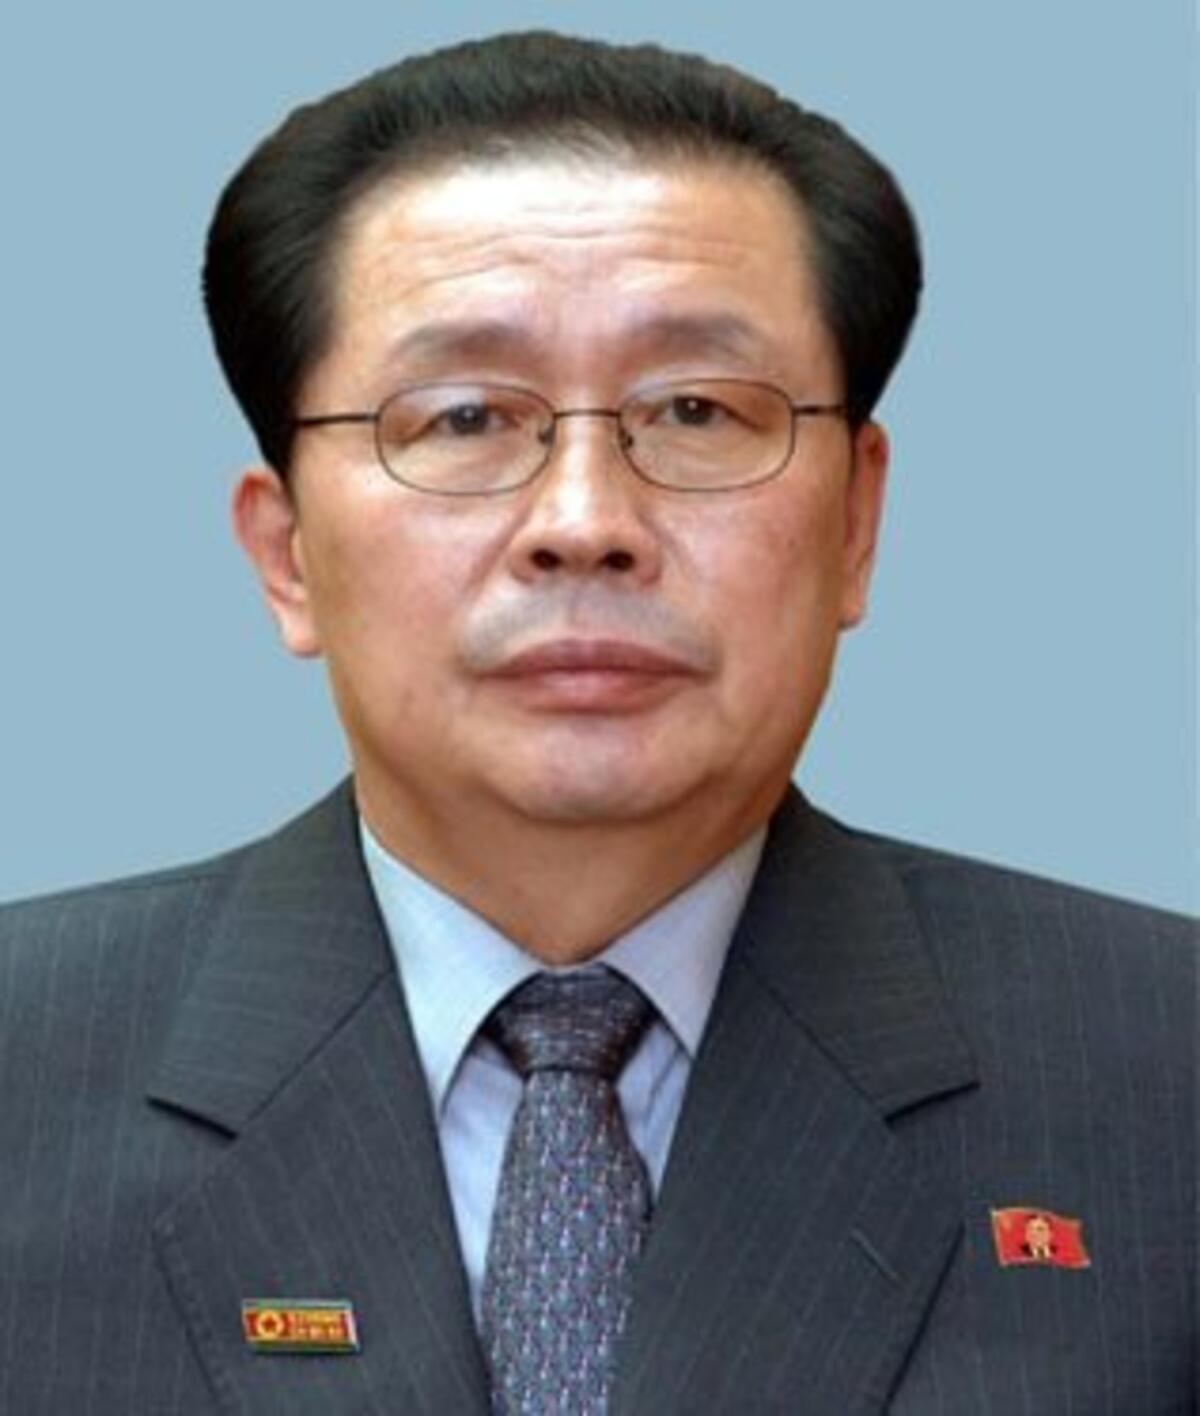 A high-ranking North Korean military official and subordinate of the recently executed Jang Sung Taek, above, has reportedly sought to defect to South Korea.